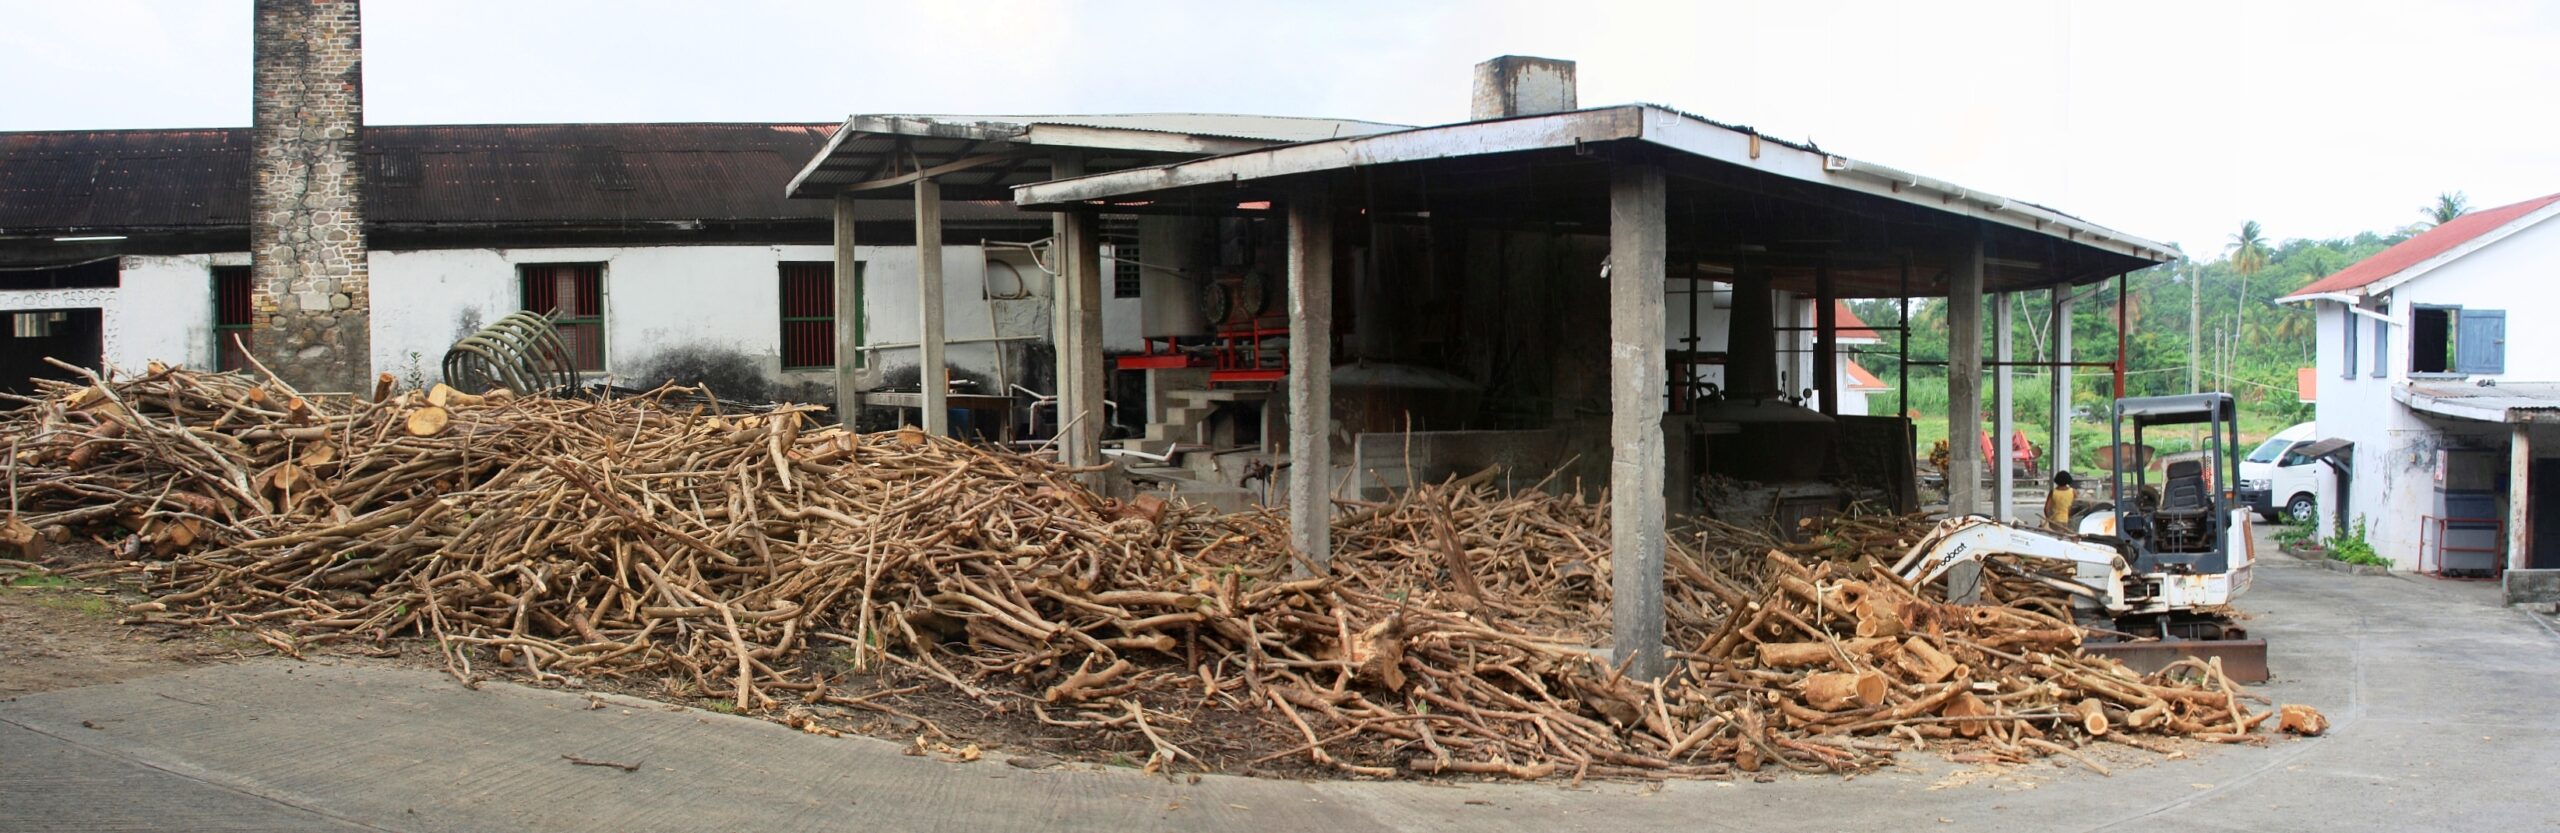 Photograph of a pile of harvested sugar cane stems next to a building where they are being processed into rum.